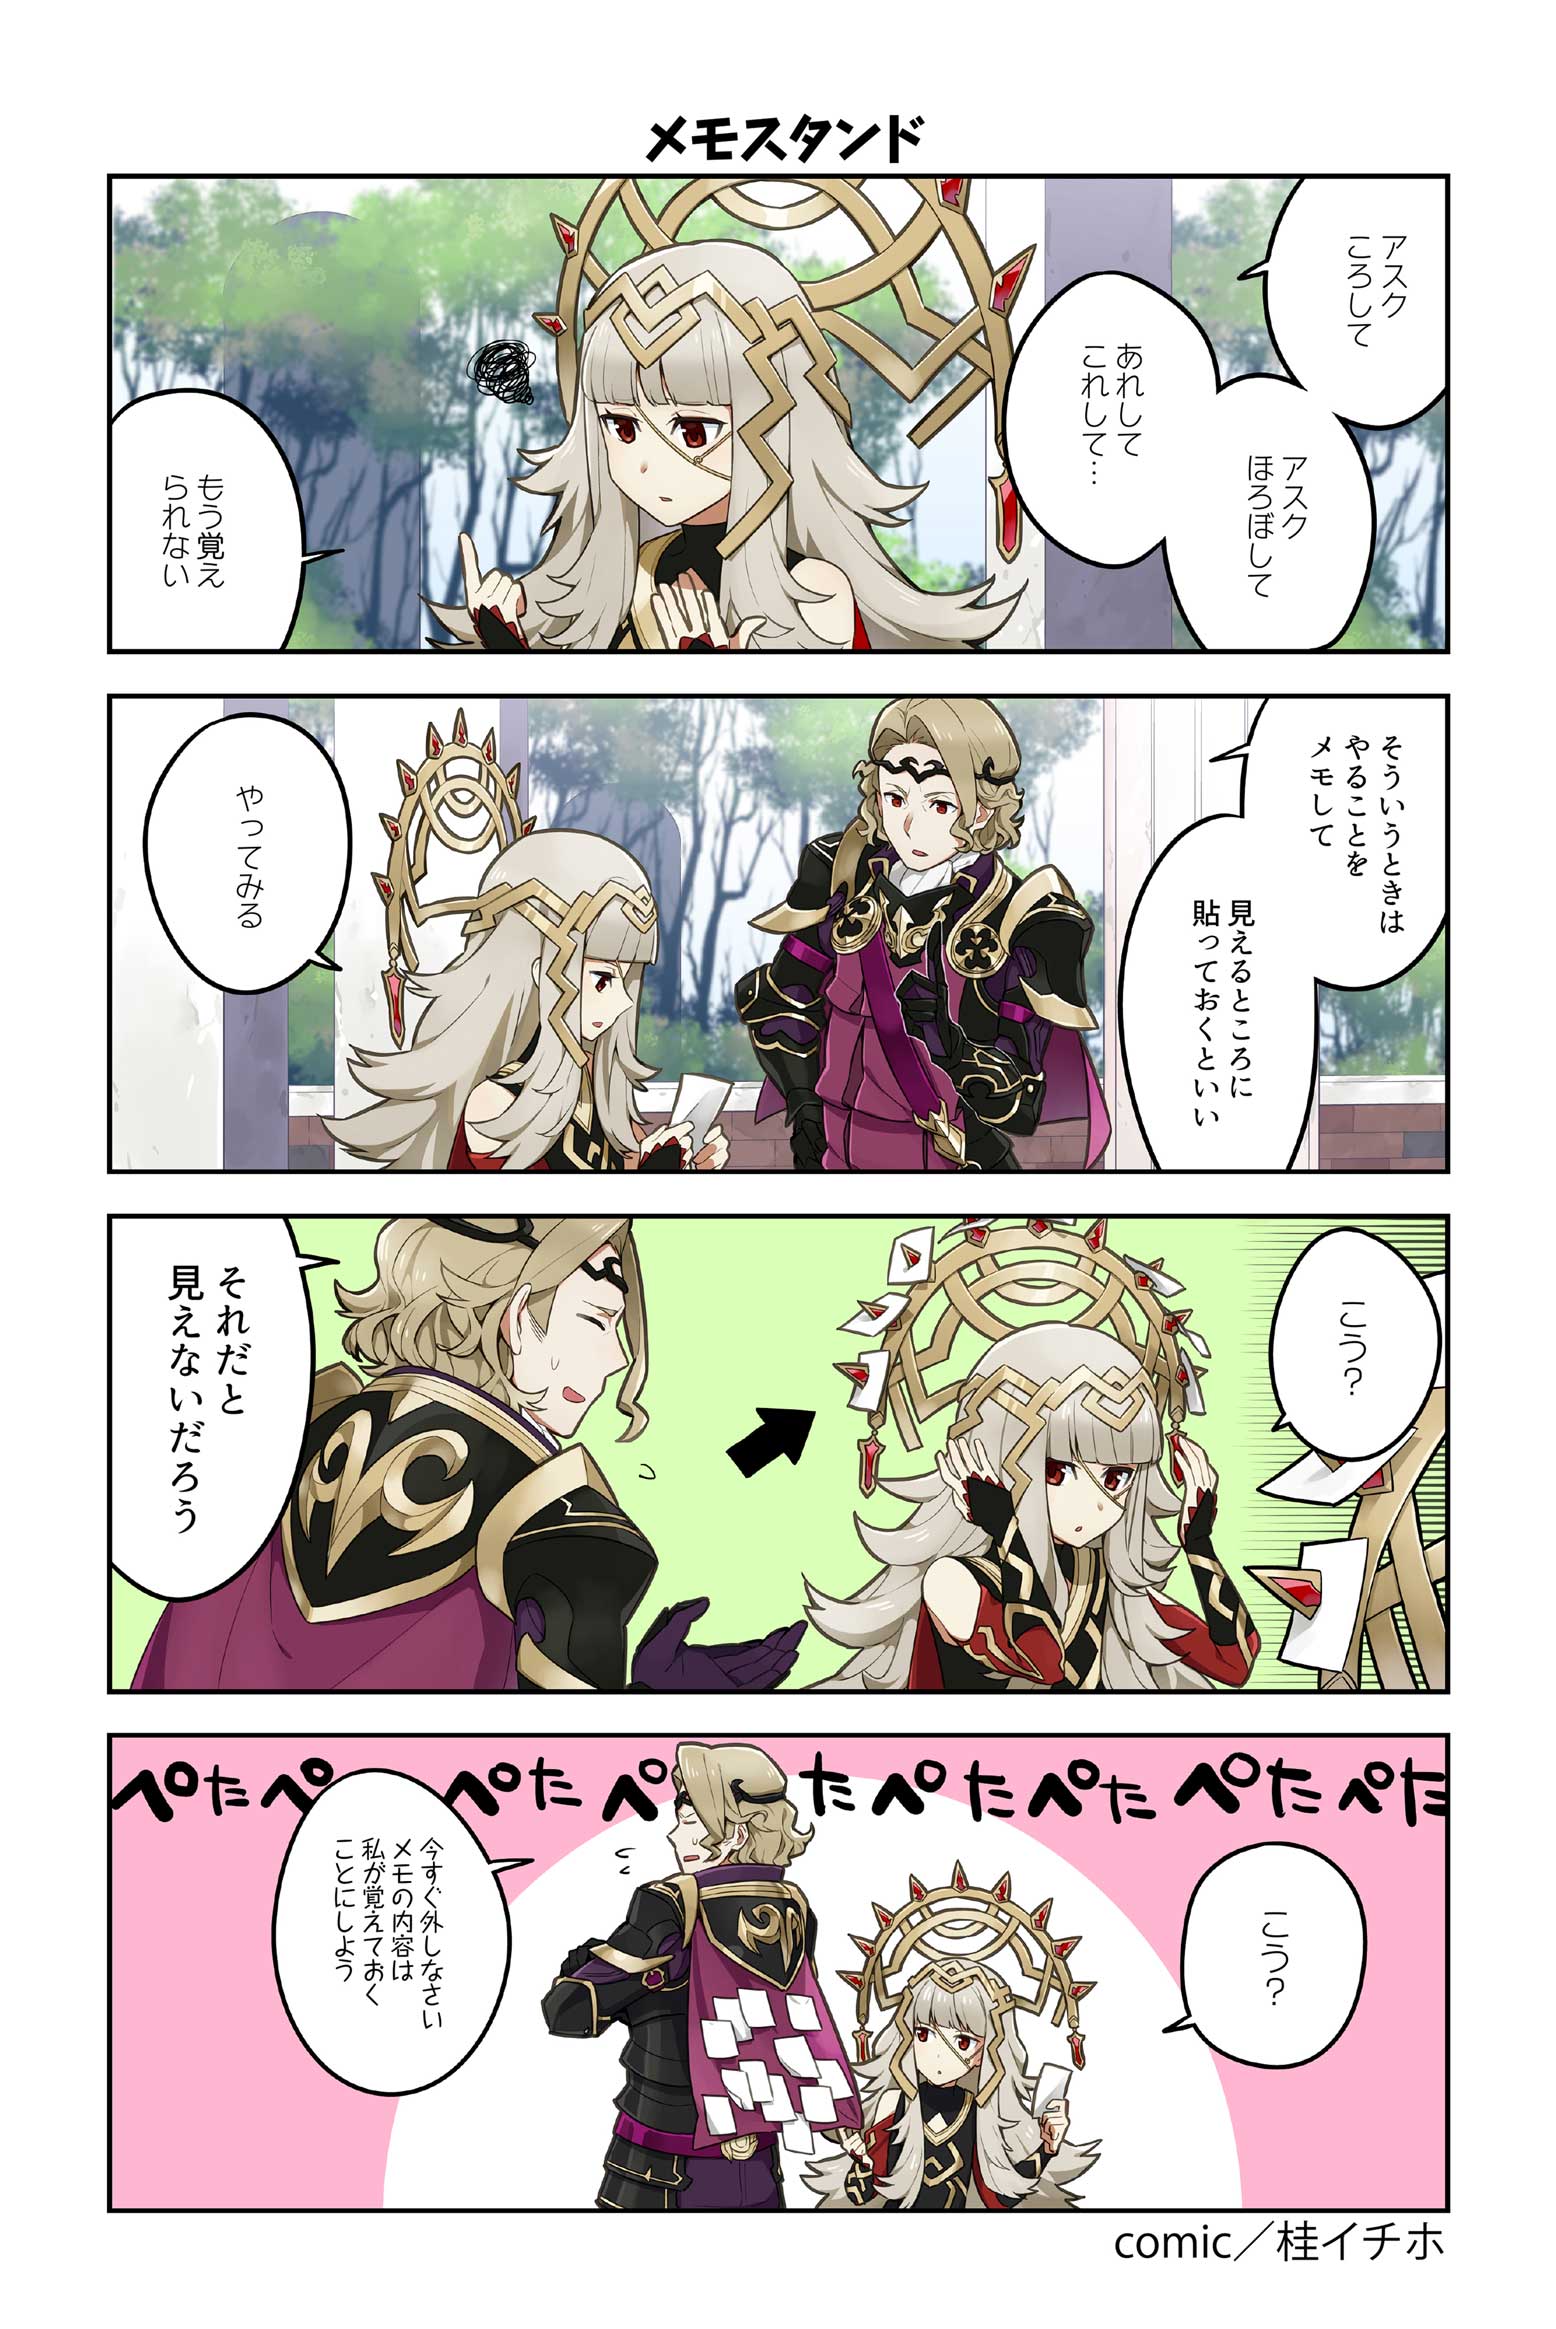 1girl armor blonde_hair blue_hair cape crown dress fire_emblem fire_emblem_heroes fire_emblem_if gloves grey_hair highres juria0801 long_hair marks_(fire_emblem_if) official_art open_mouth red_eyes short_hair smile translation_request veronica_(fire_emblem)